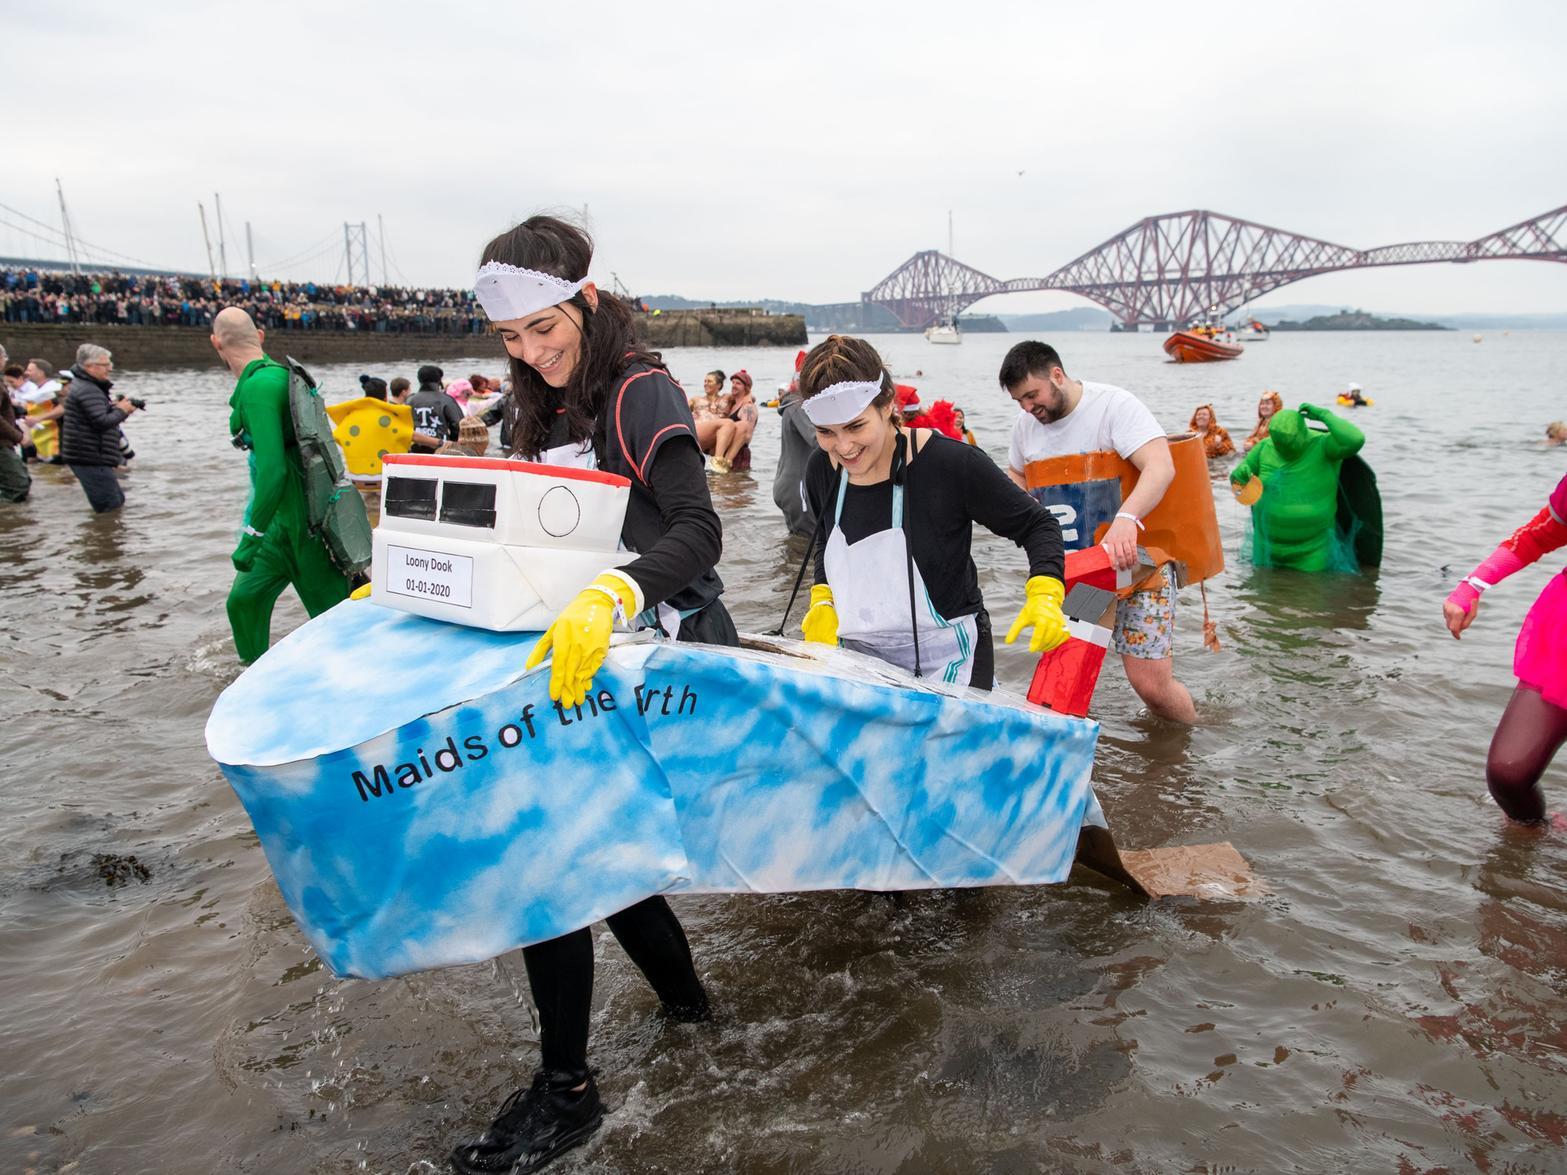 These dookers dressed up as the Maid of the Forth sightseeing boat which goes under the Forth Bridge and to Inchcolm Island from South Queensferry.